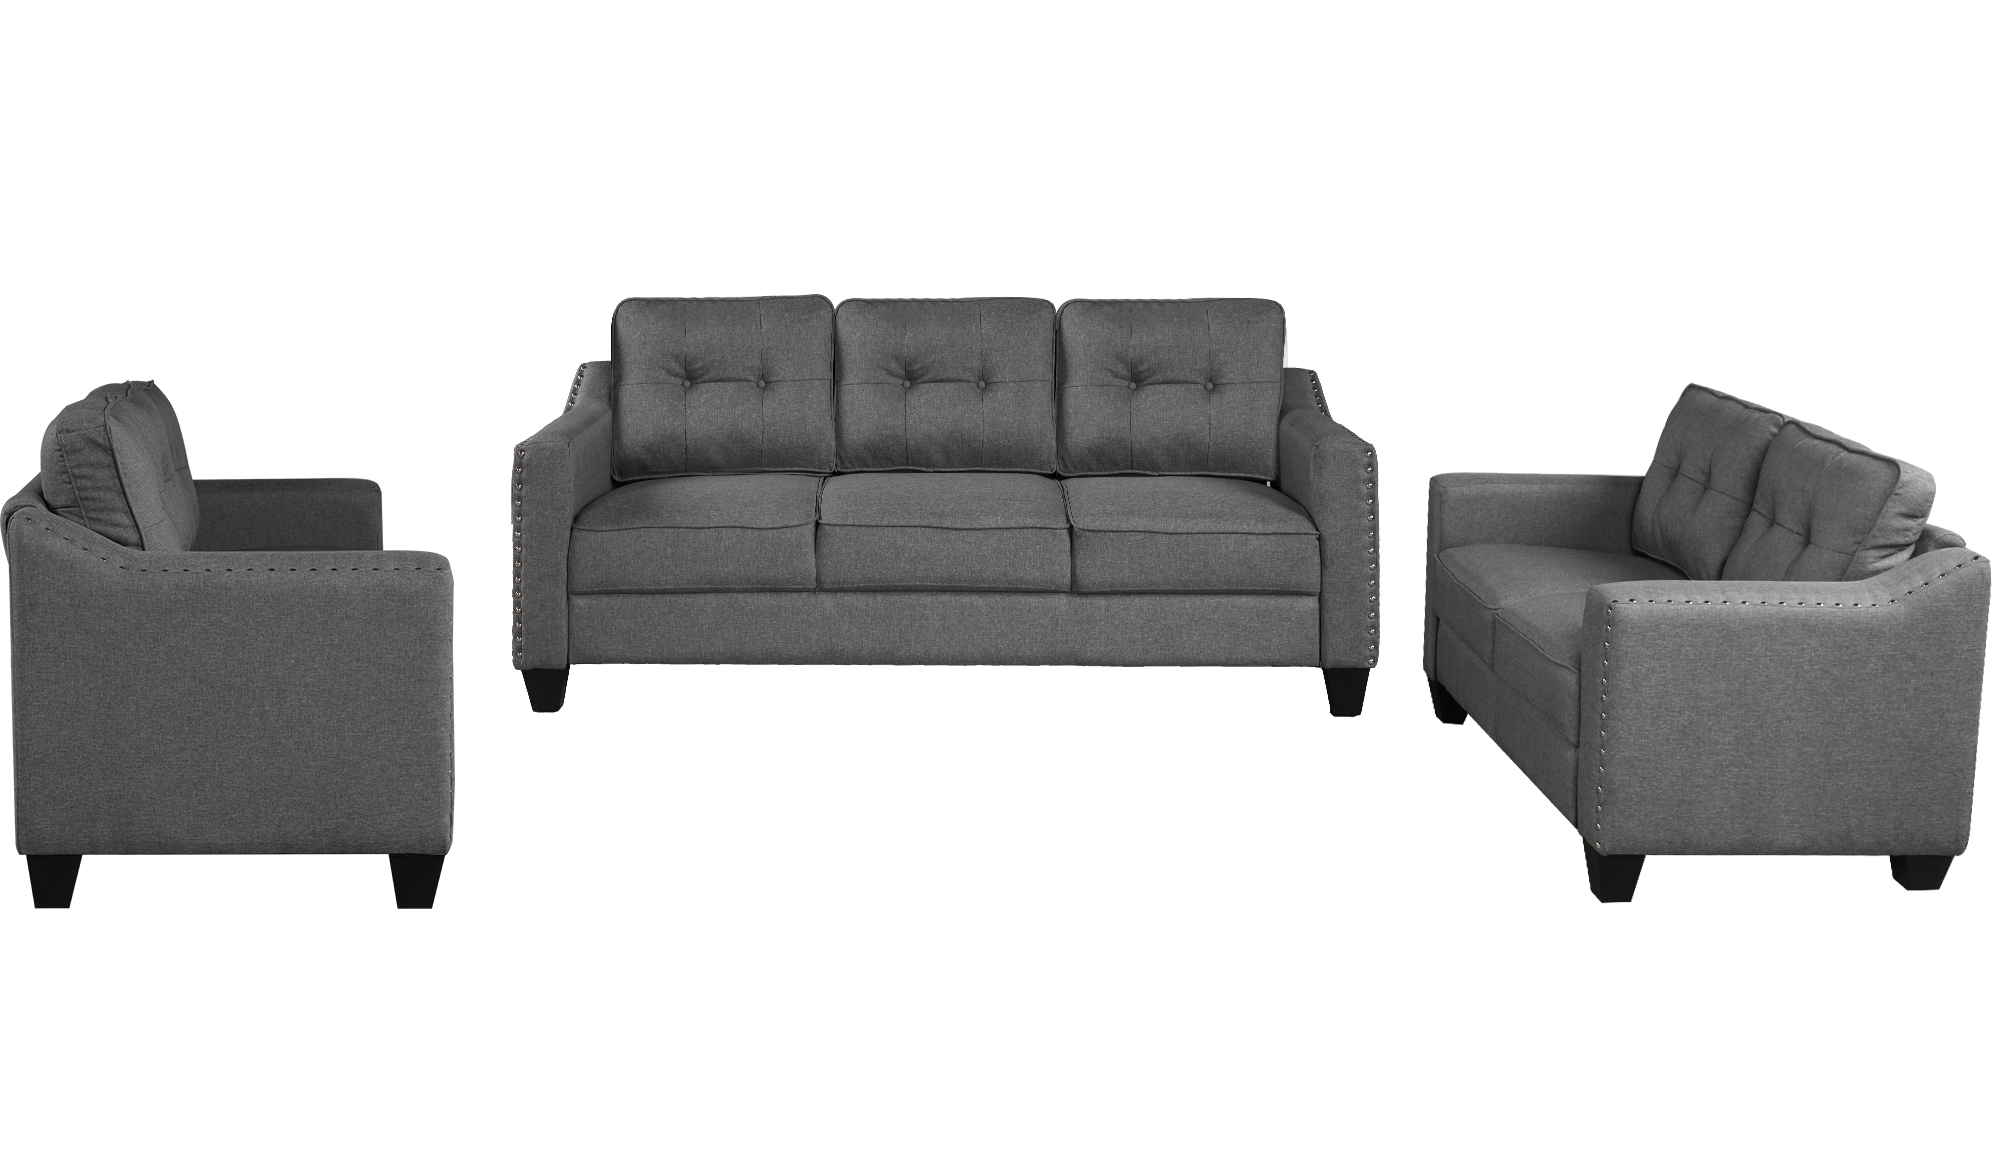 3 Piece Living Room Set With Tufted Cushions - WY000077EAA